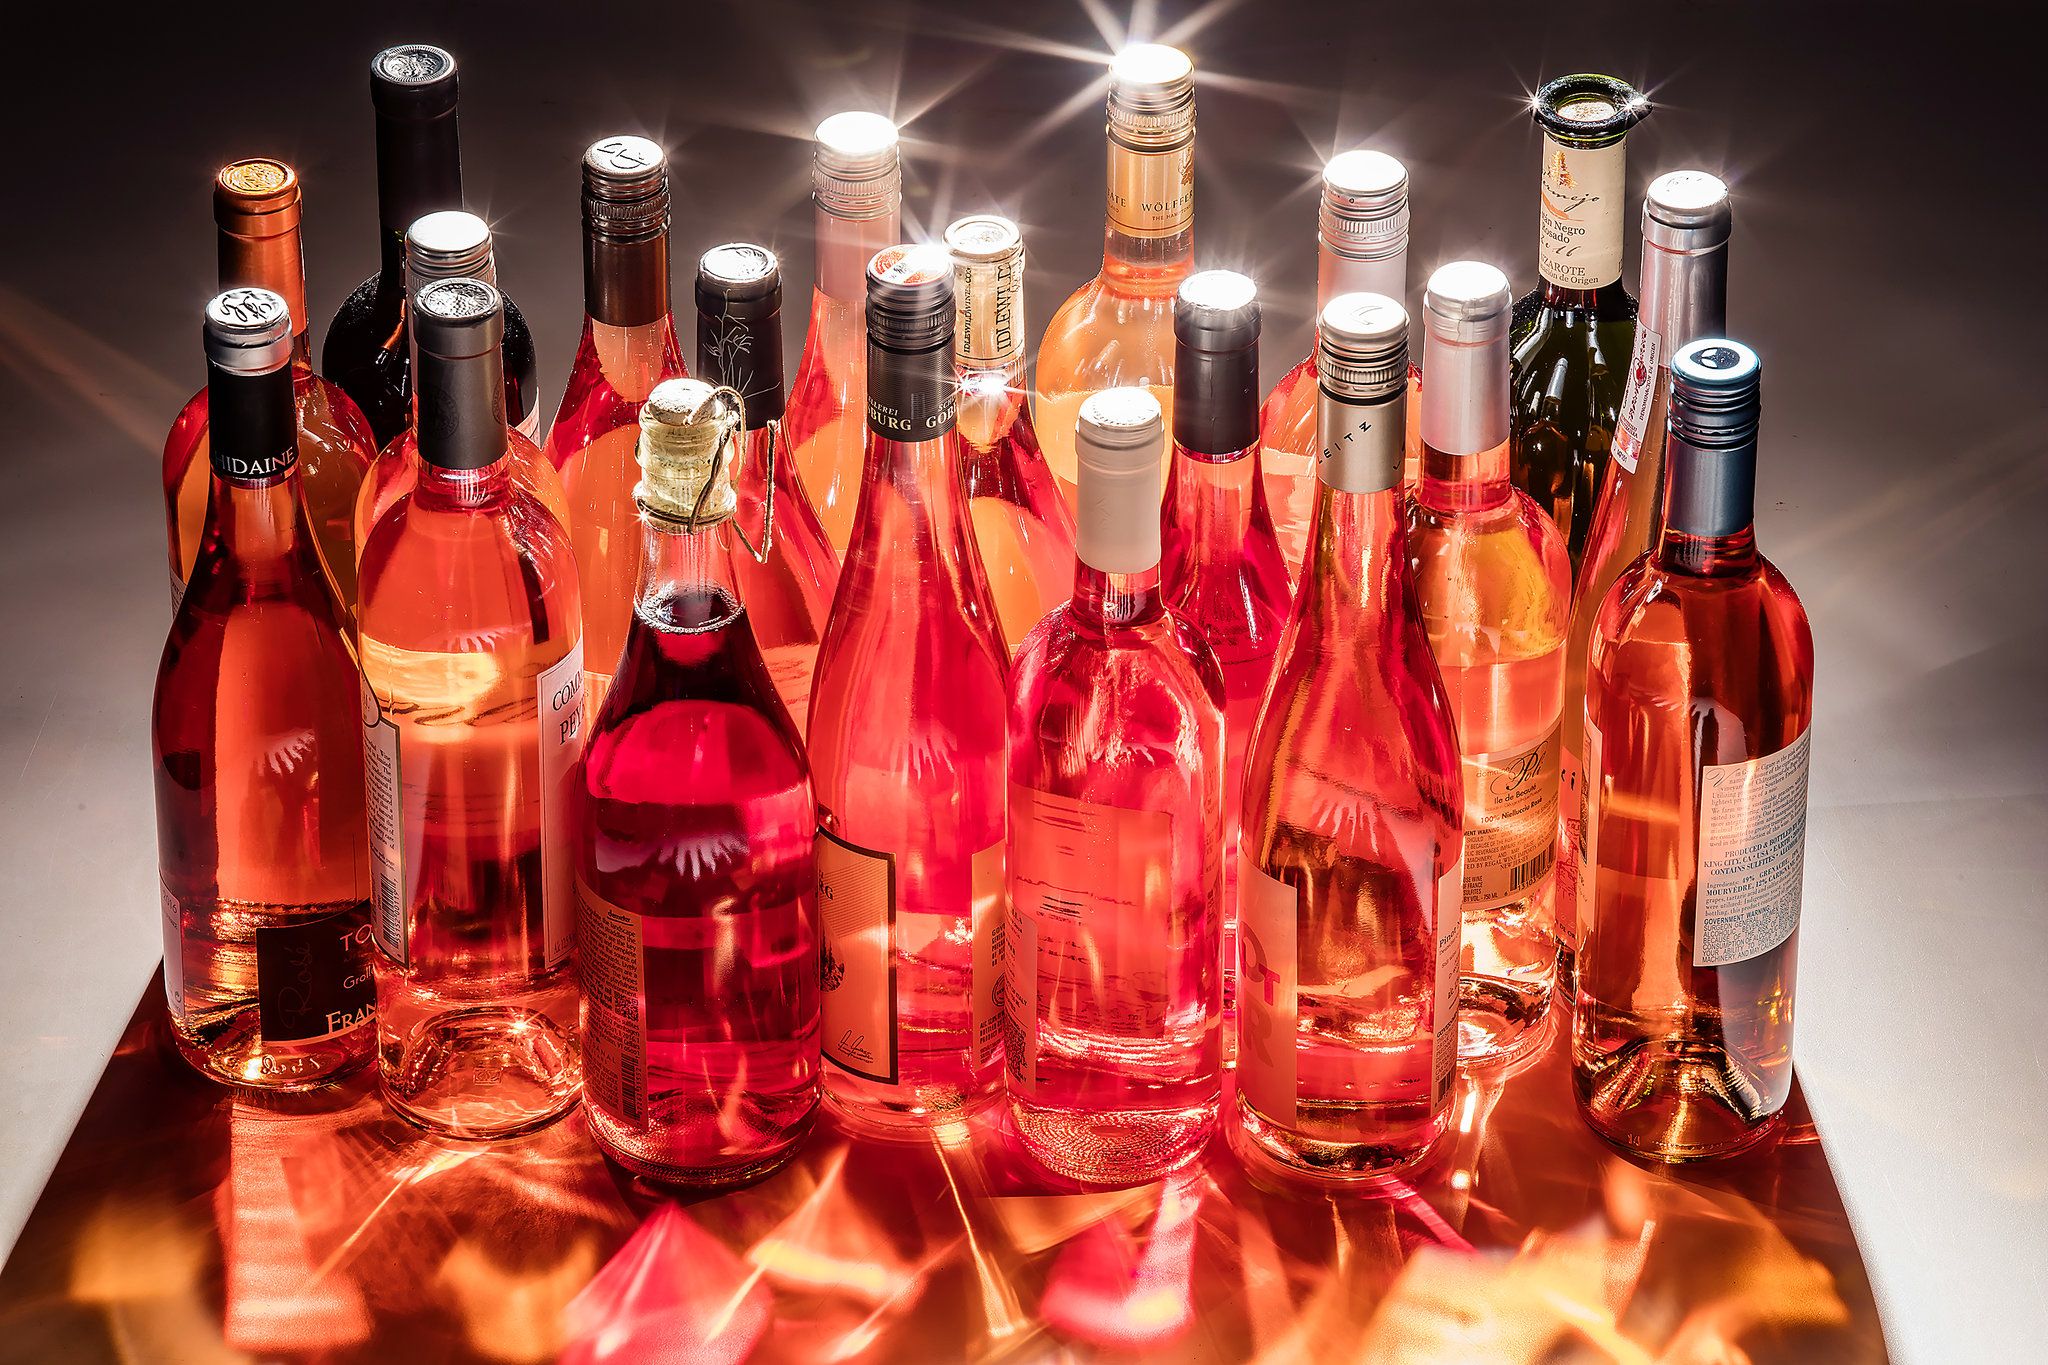 20 Wines Under $20: The Savory Side of Rosé